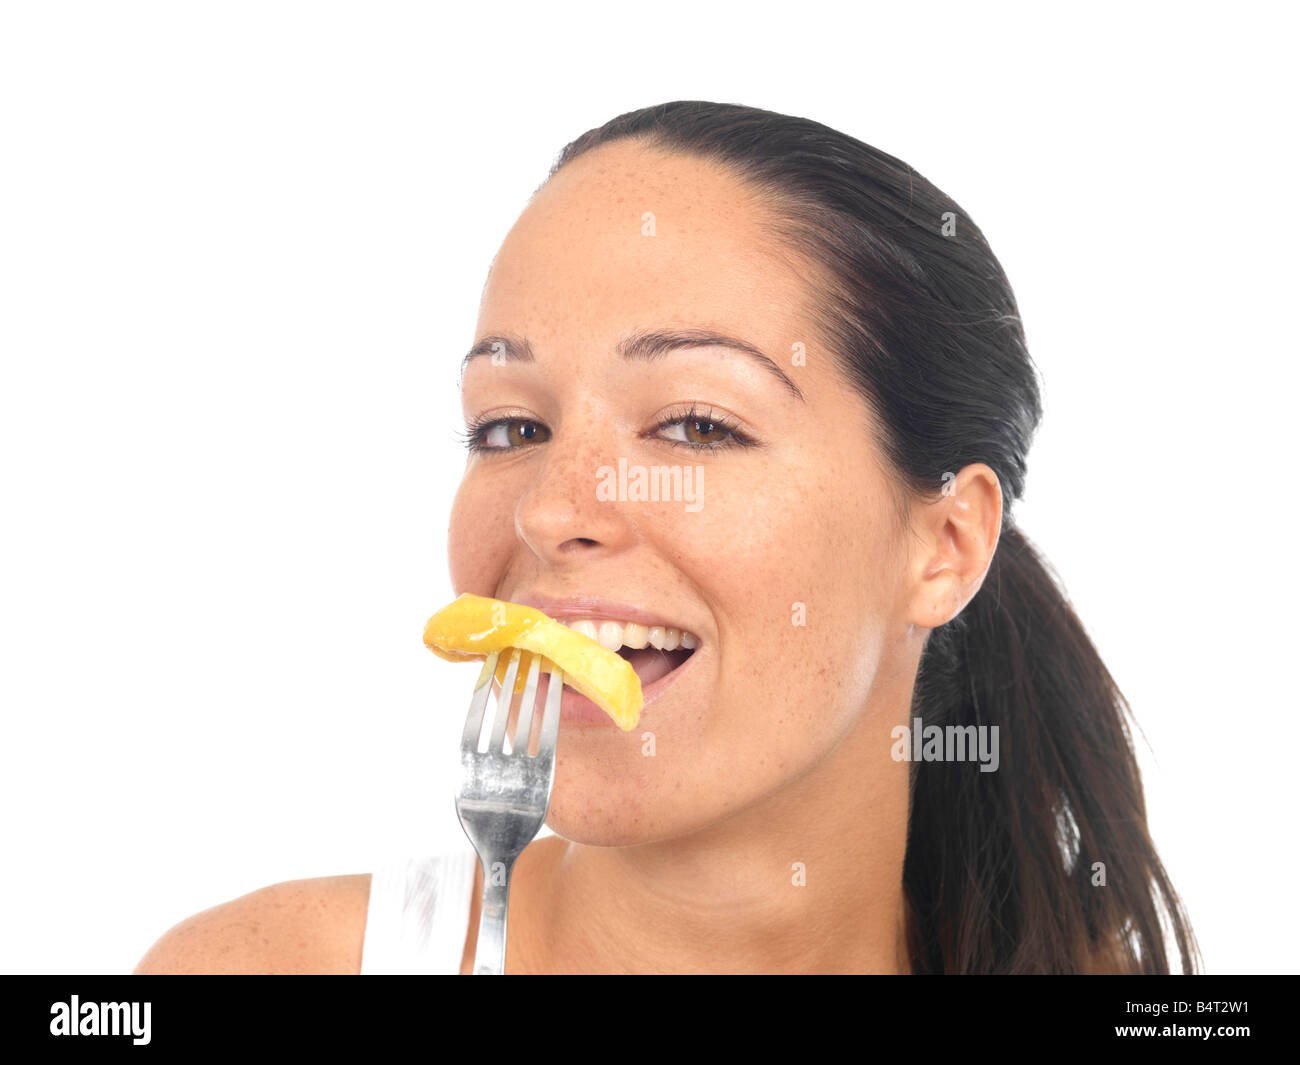 Young Woman Eating Chips Model Released Stock Photo